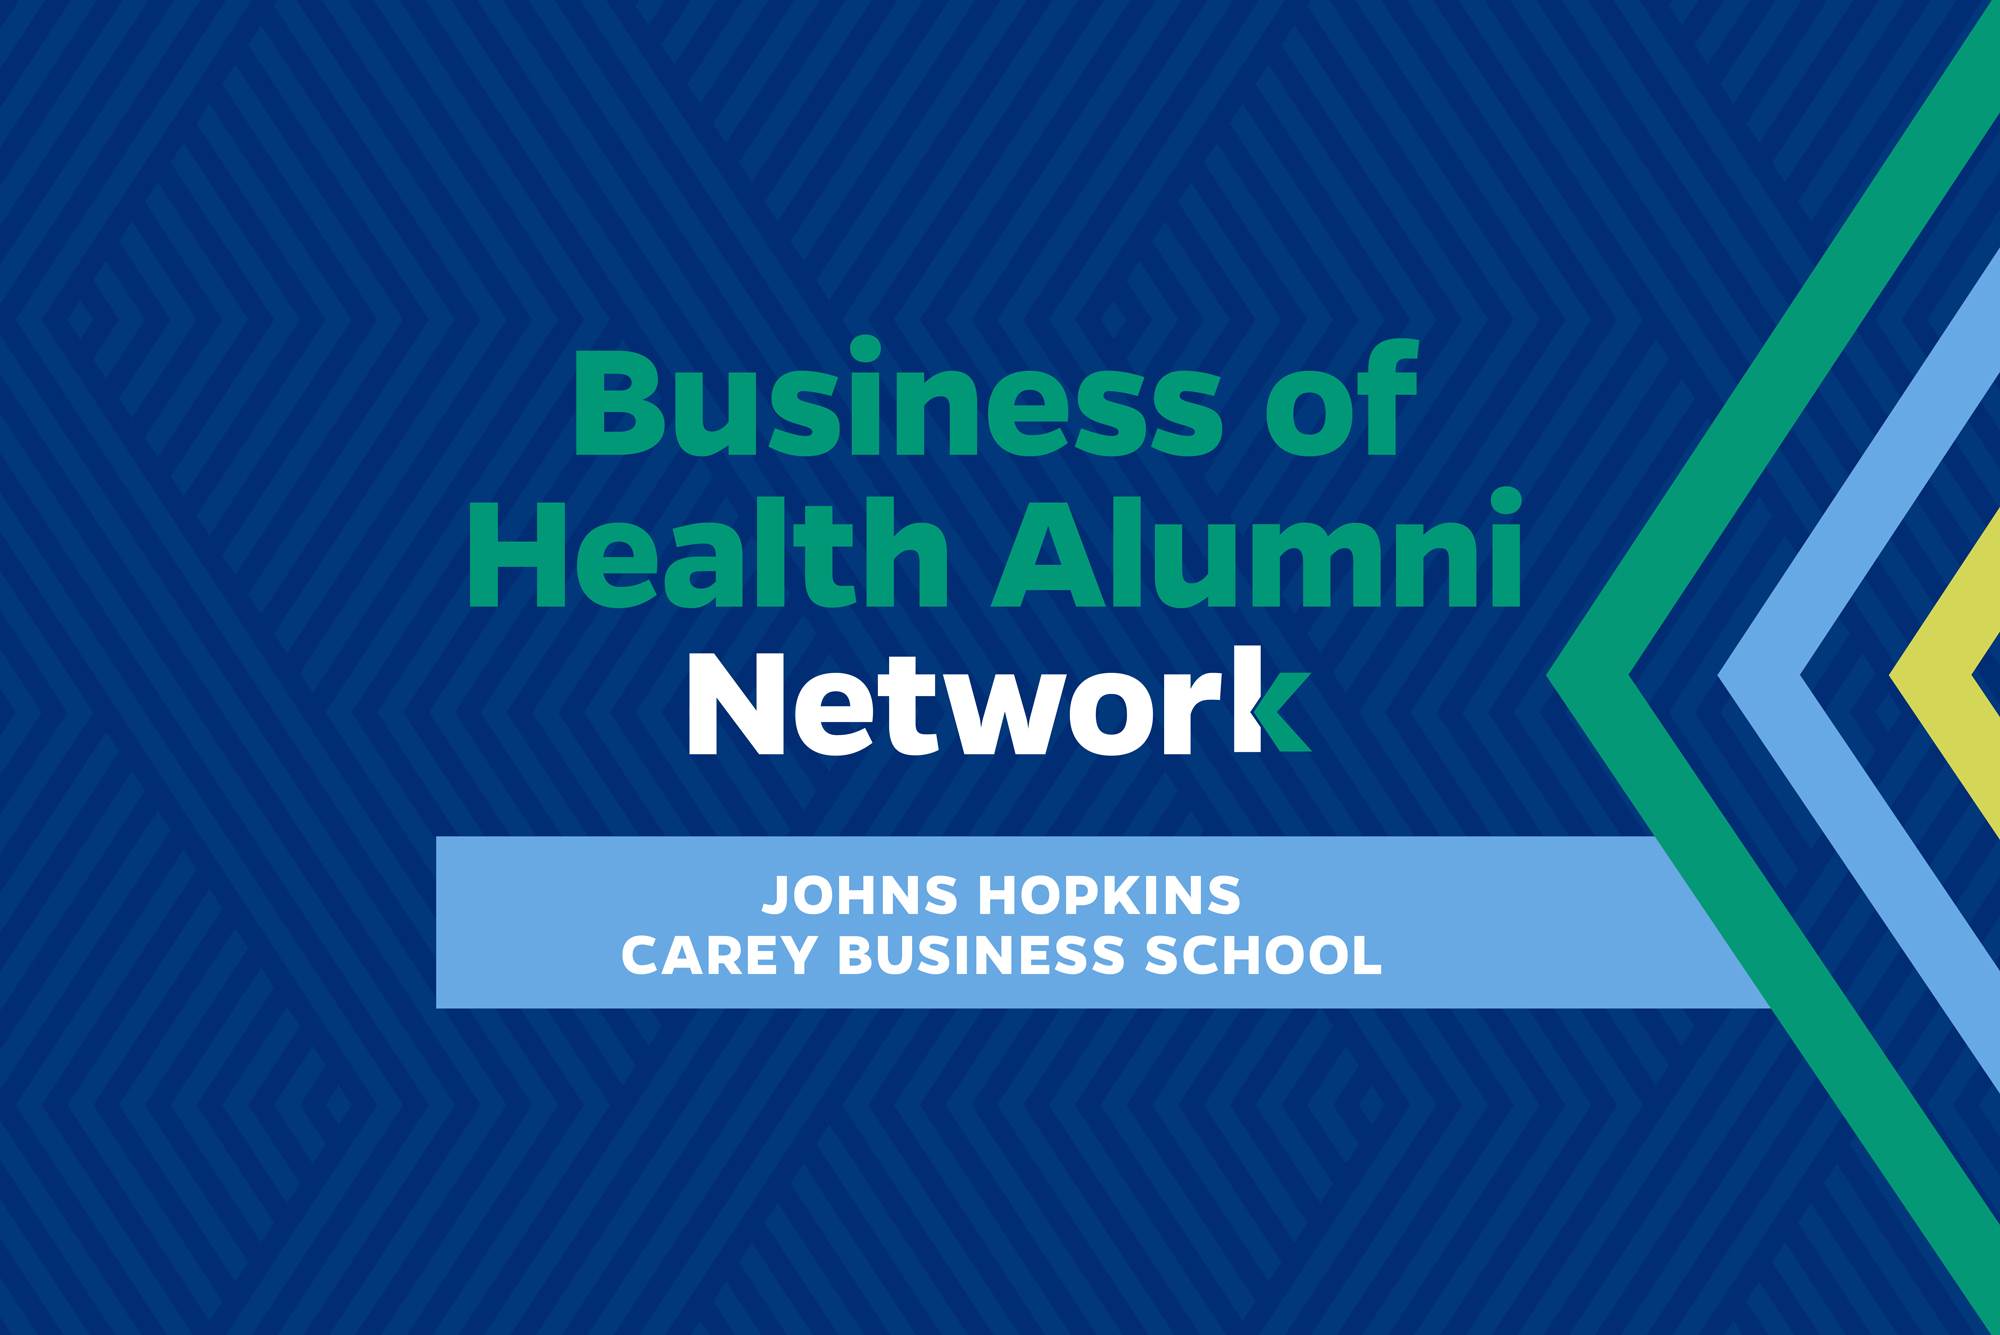 Carey Business School: A Conversation on Advancements in Virtual Healthcare